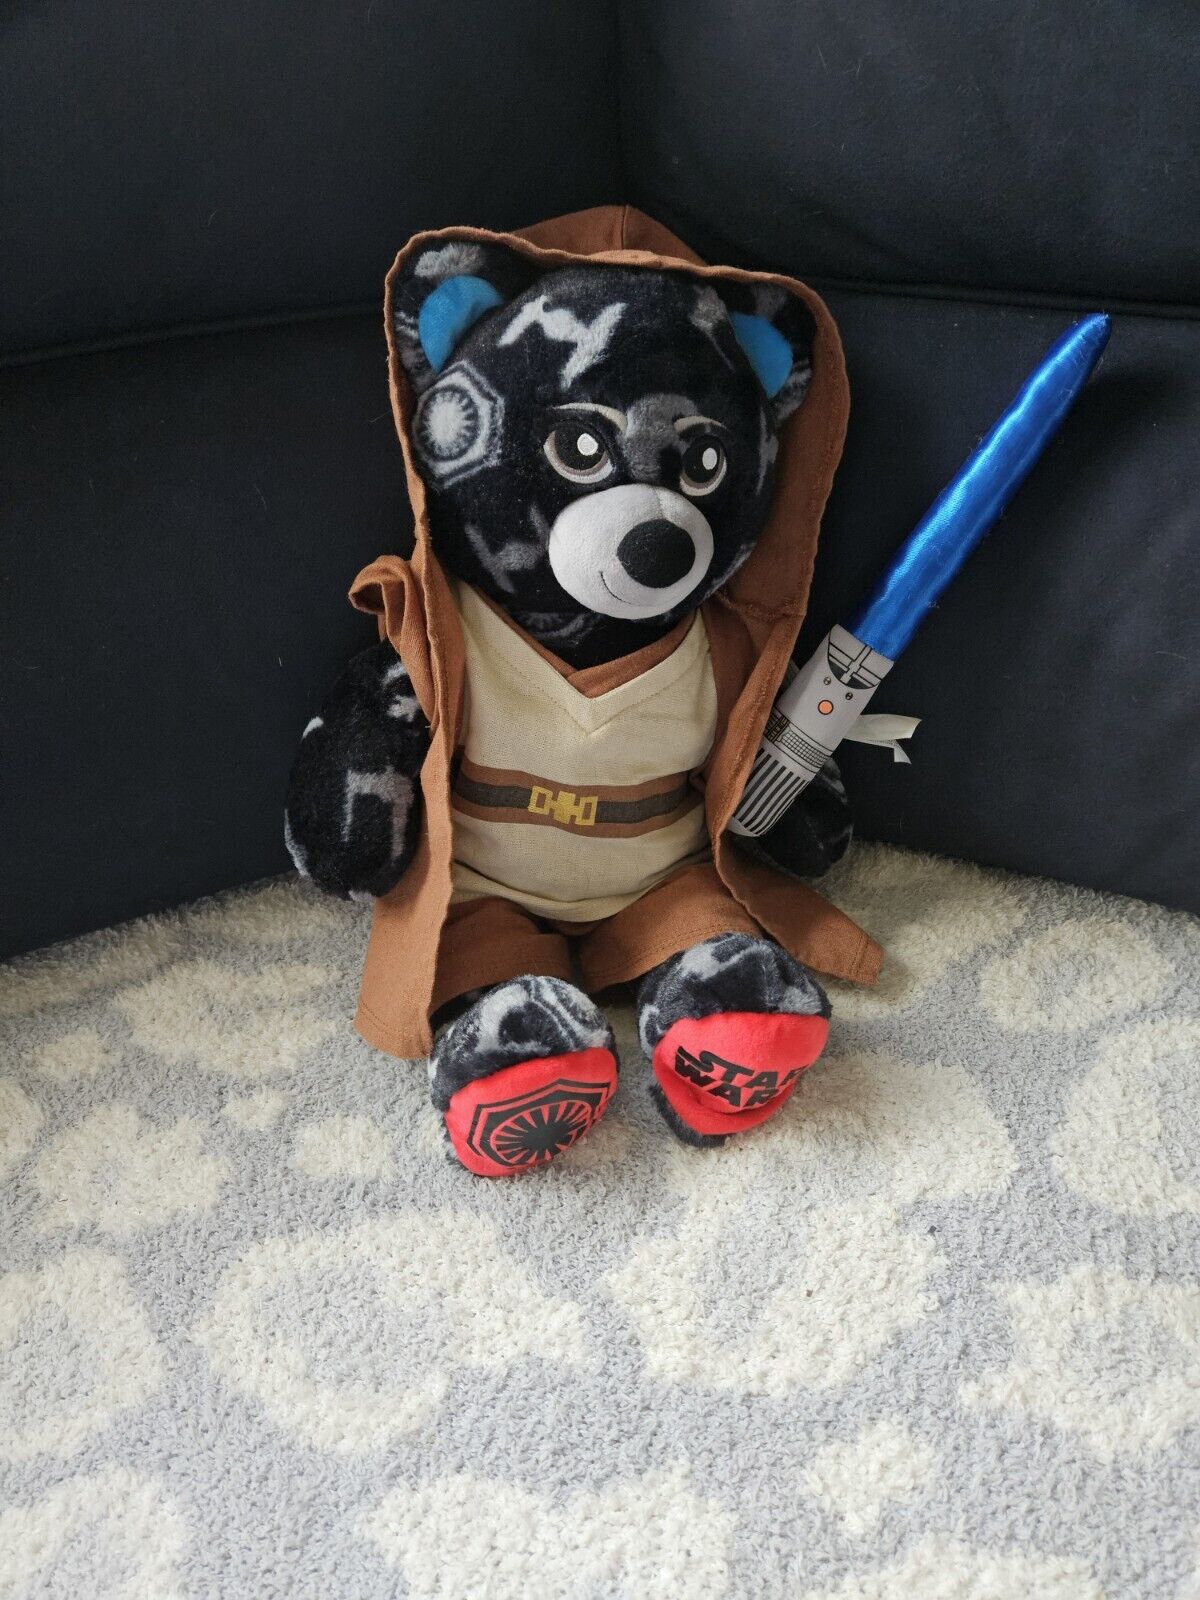 Star Wars Build A Bear With Cape, Jedi Outfit, And Light Saber